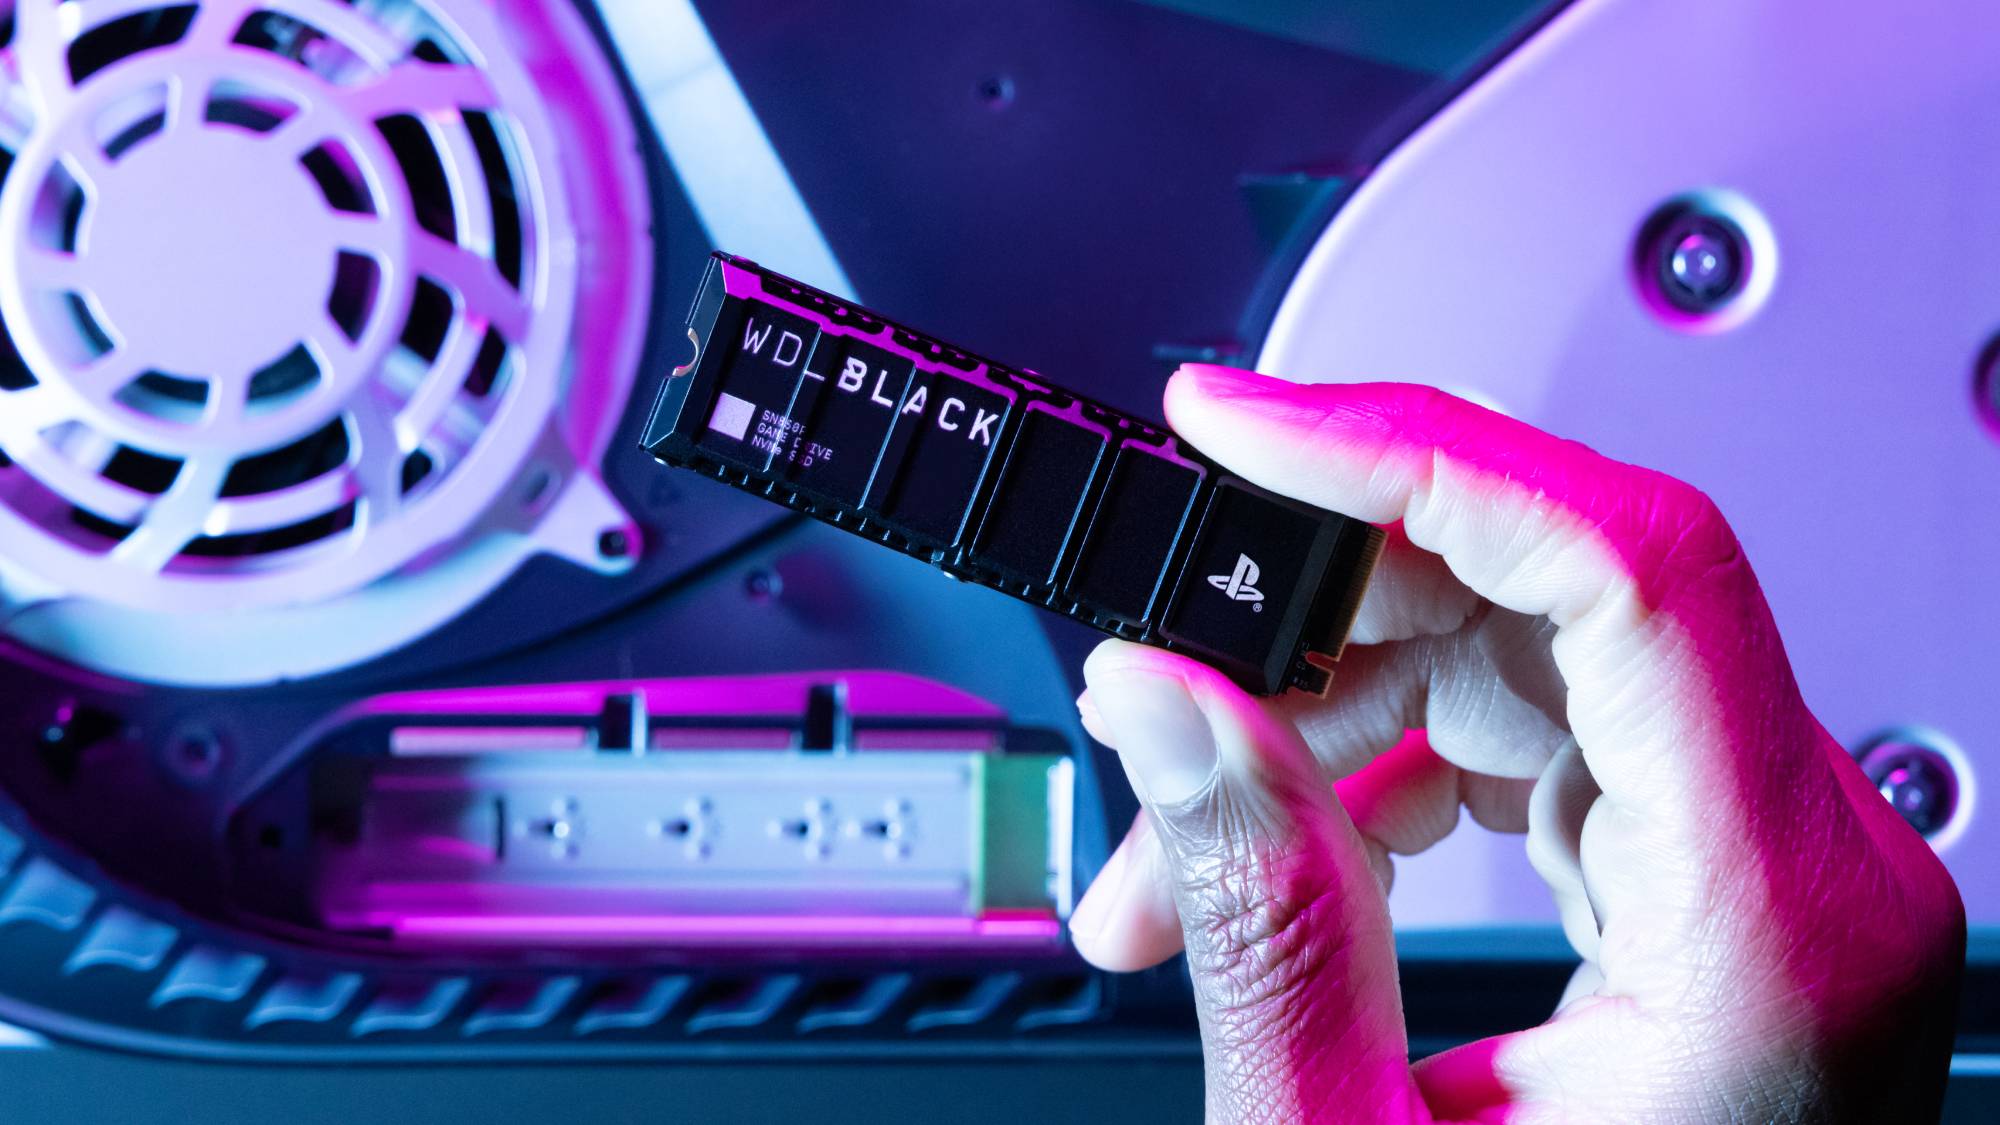 Western Digital launches new PS5 SSD that costs more than the